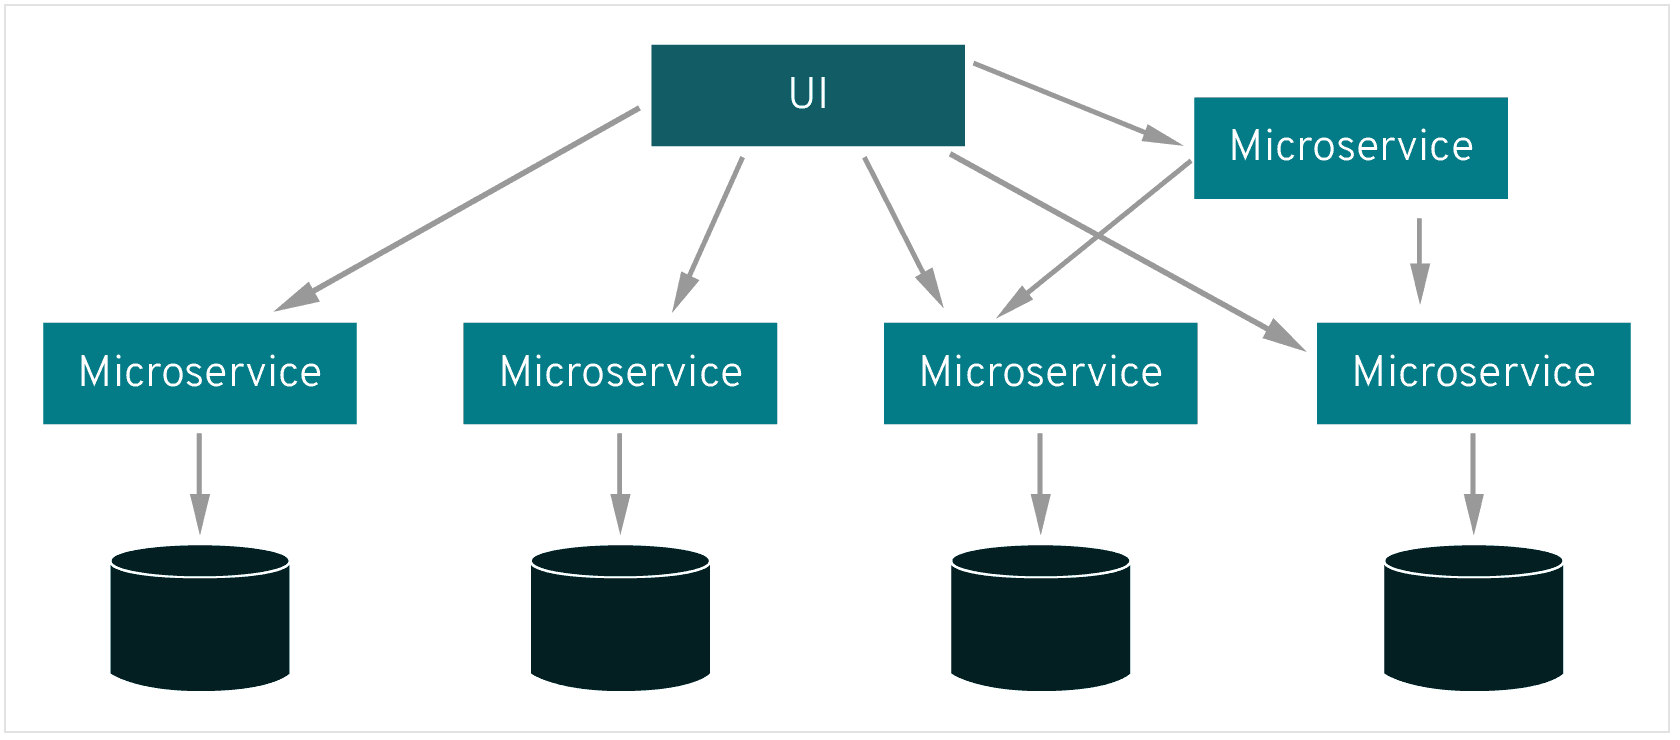 What's a service mesh?